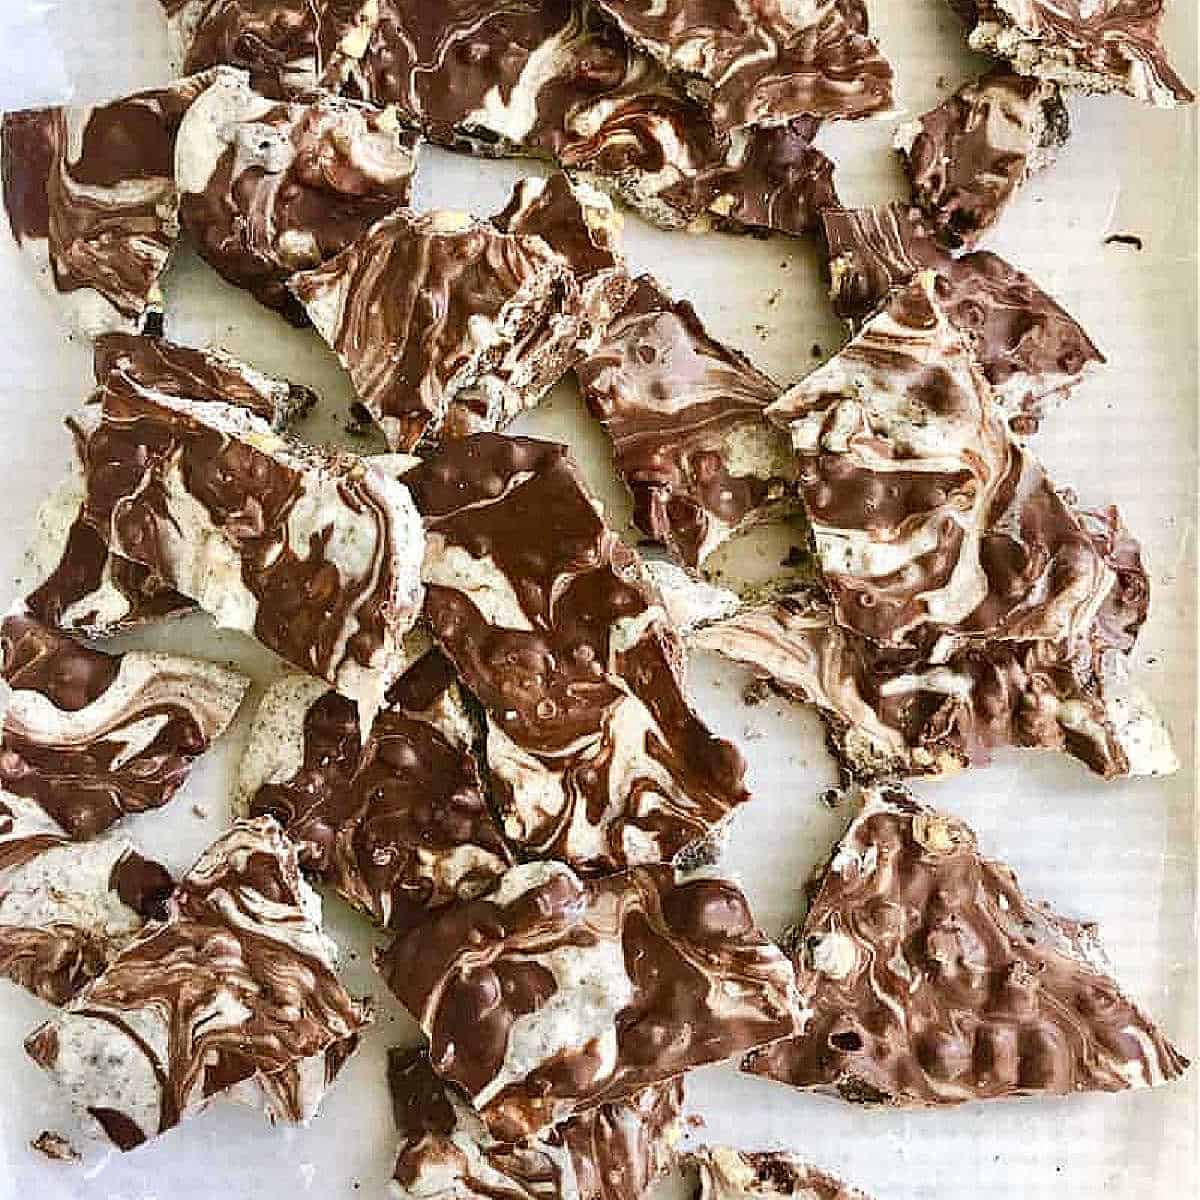 Tempered Chocolate Bark (+ how to temper)